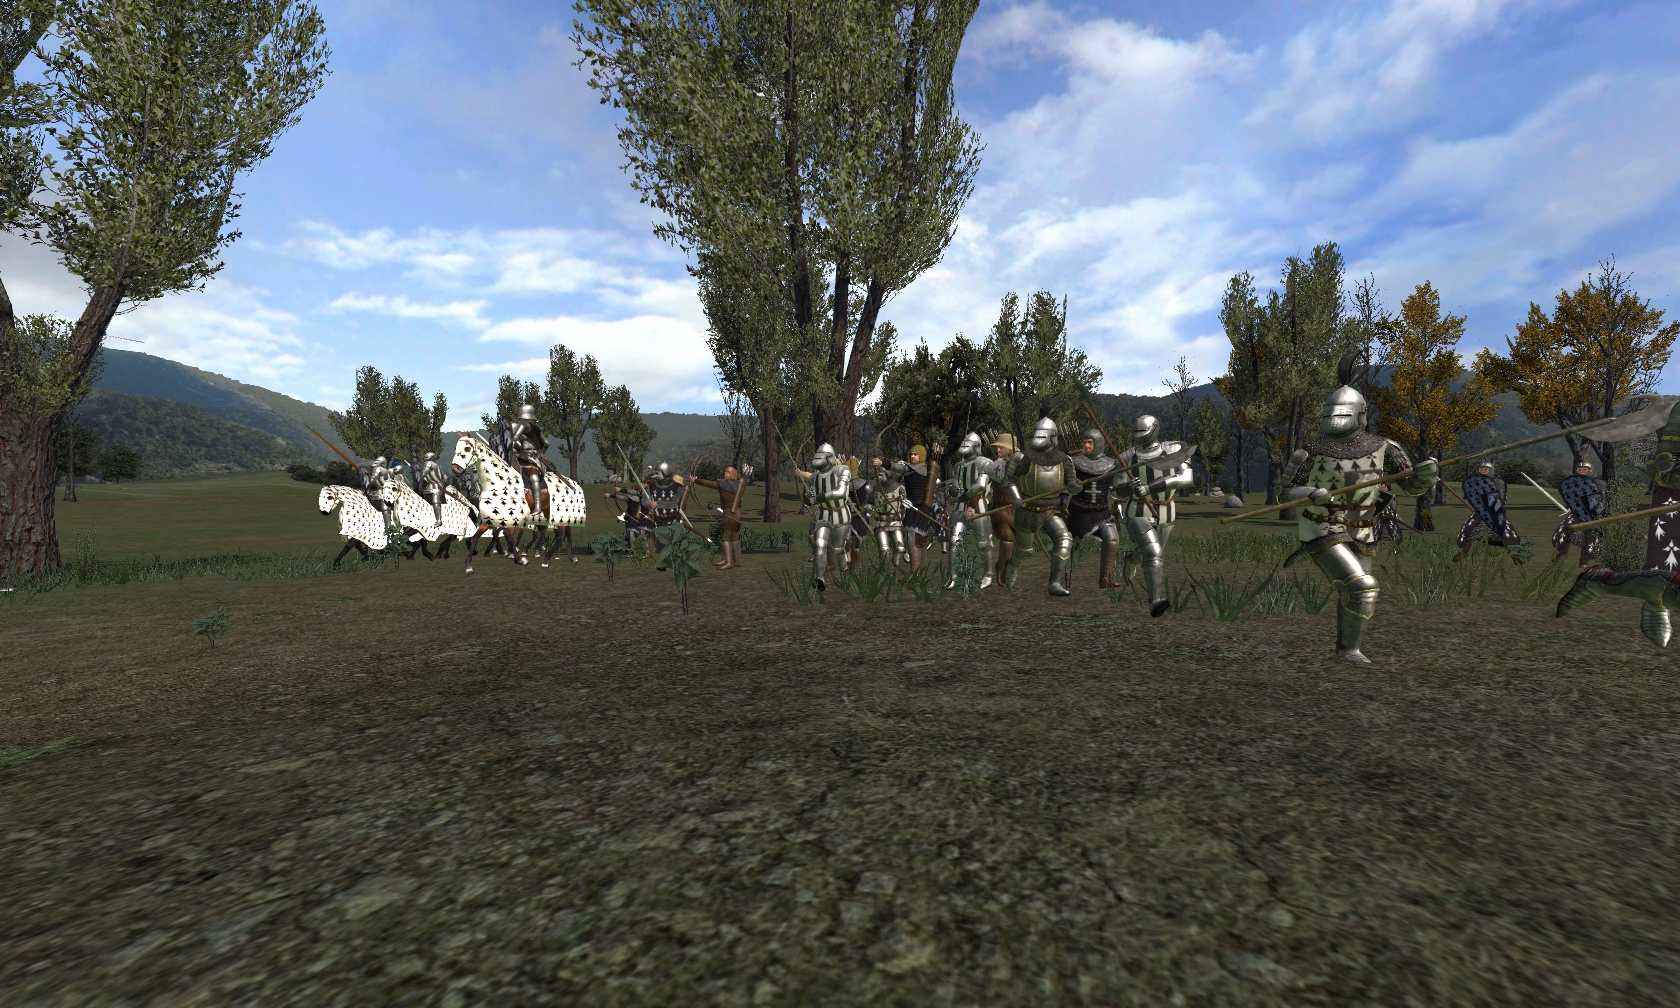 Mount blade warband города. Mount and Blade 1429. La guerre de Cent ans Mount and Blade. Белые кусты в Warbande. Mount and Blade Warband la guerre de Cent ans стрелы.